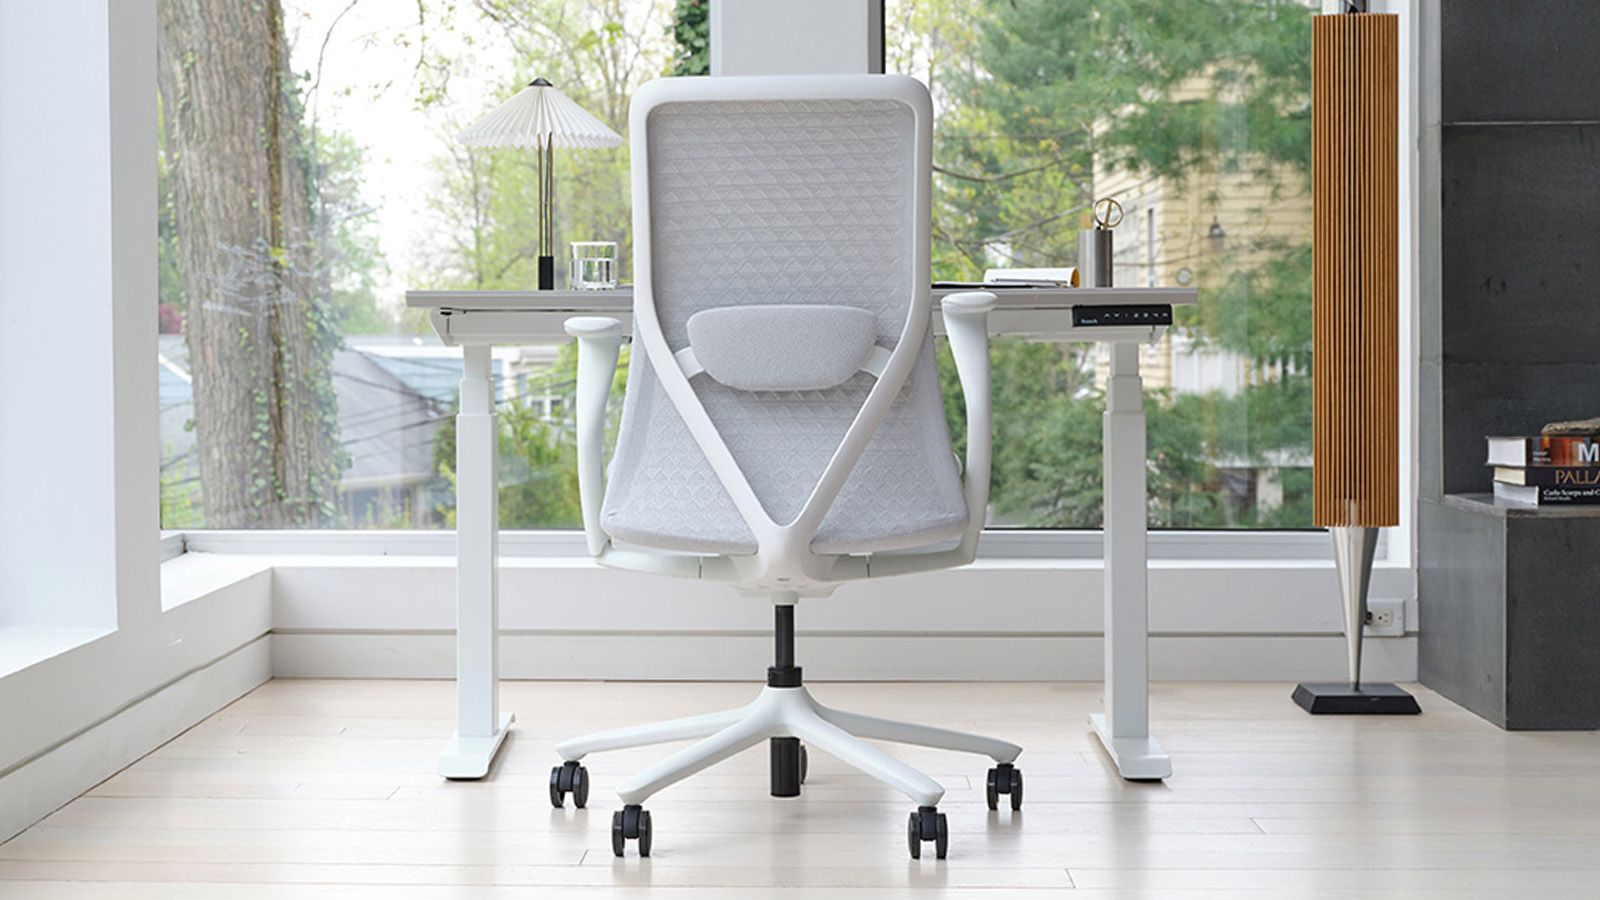 5 Best Small Office Chairs for Short People in 2023